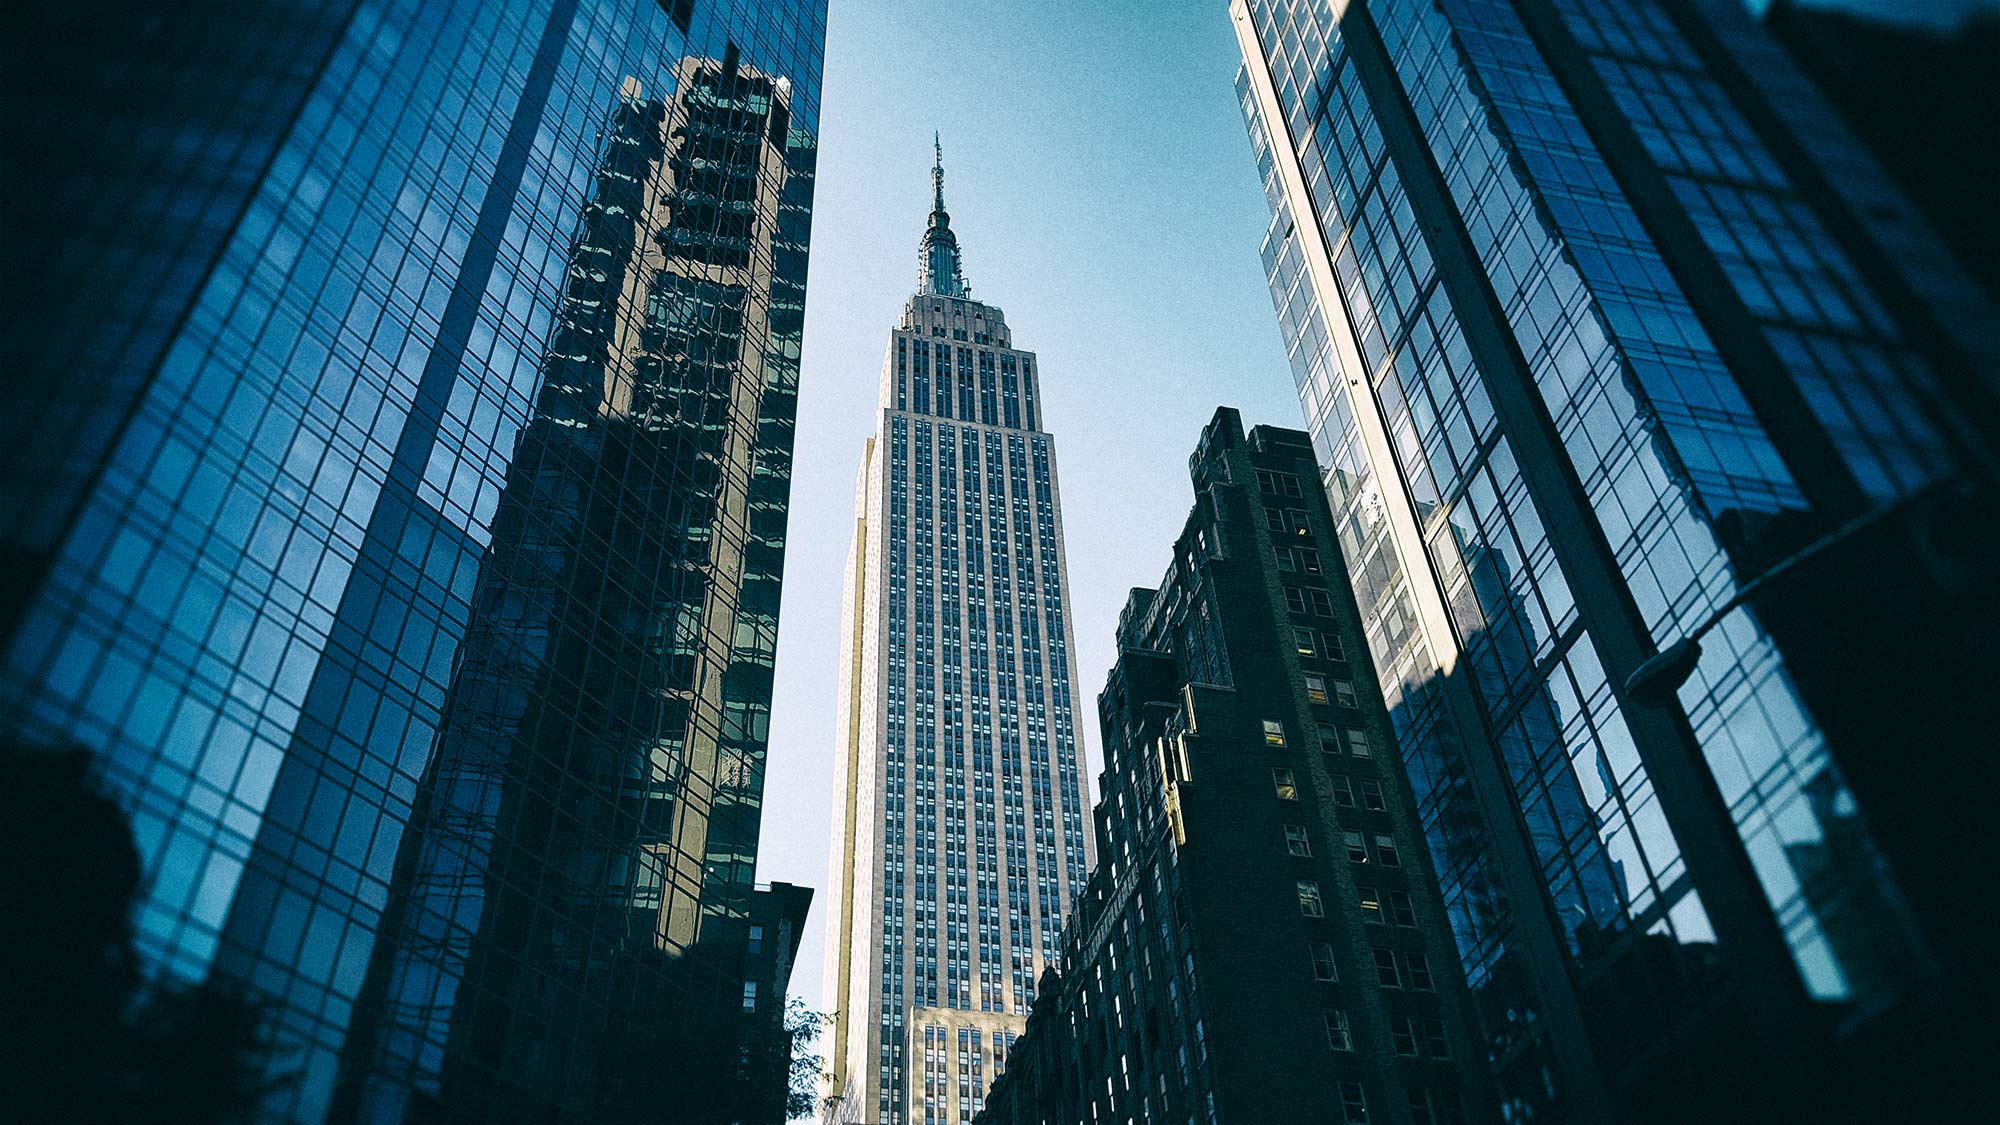 empire state building ©2017 bret wills